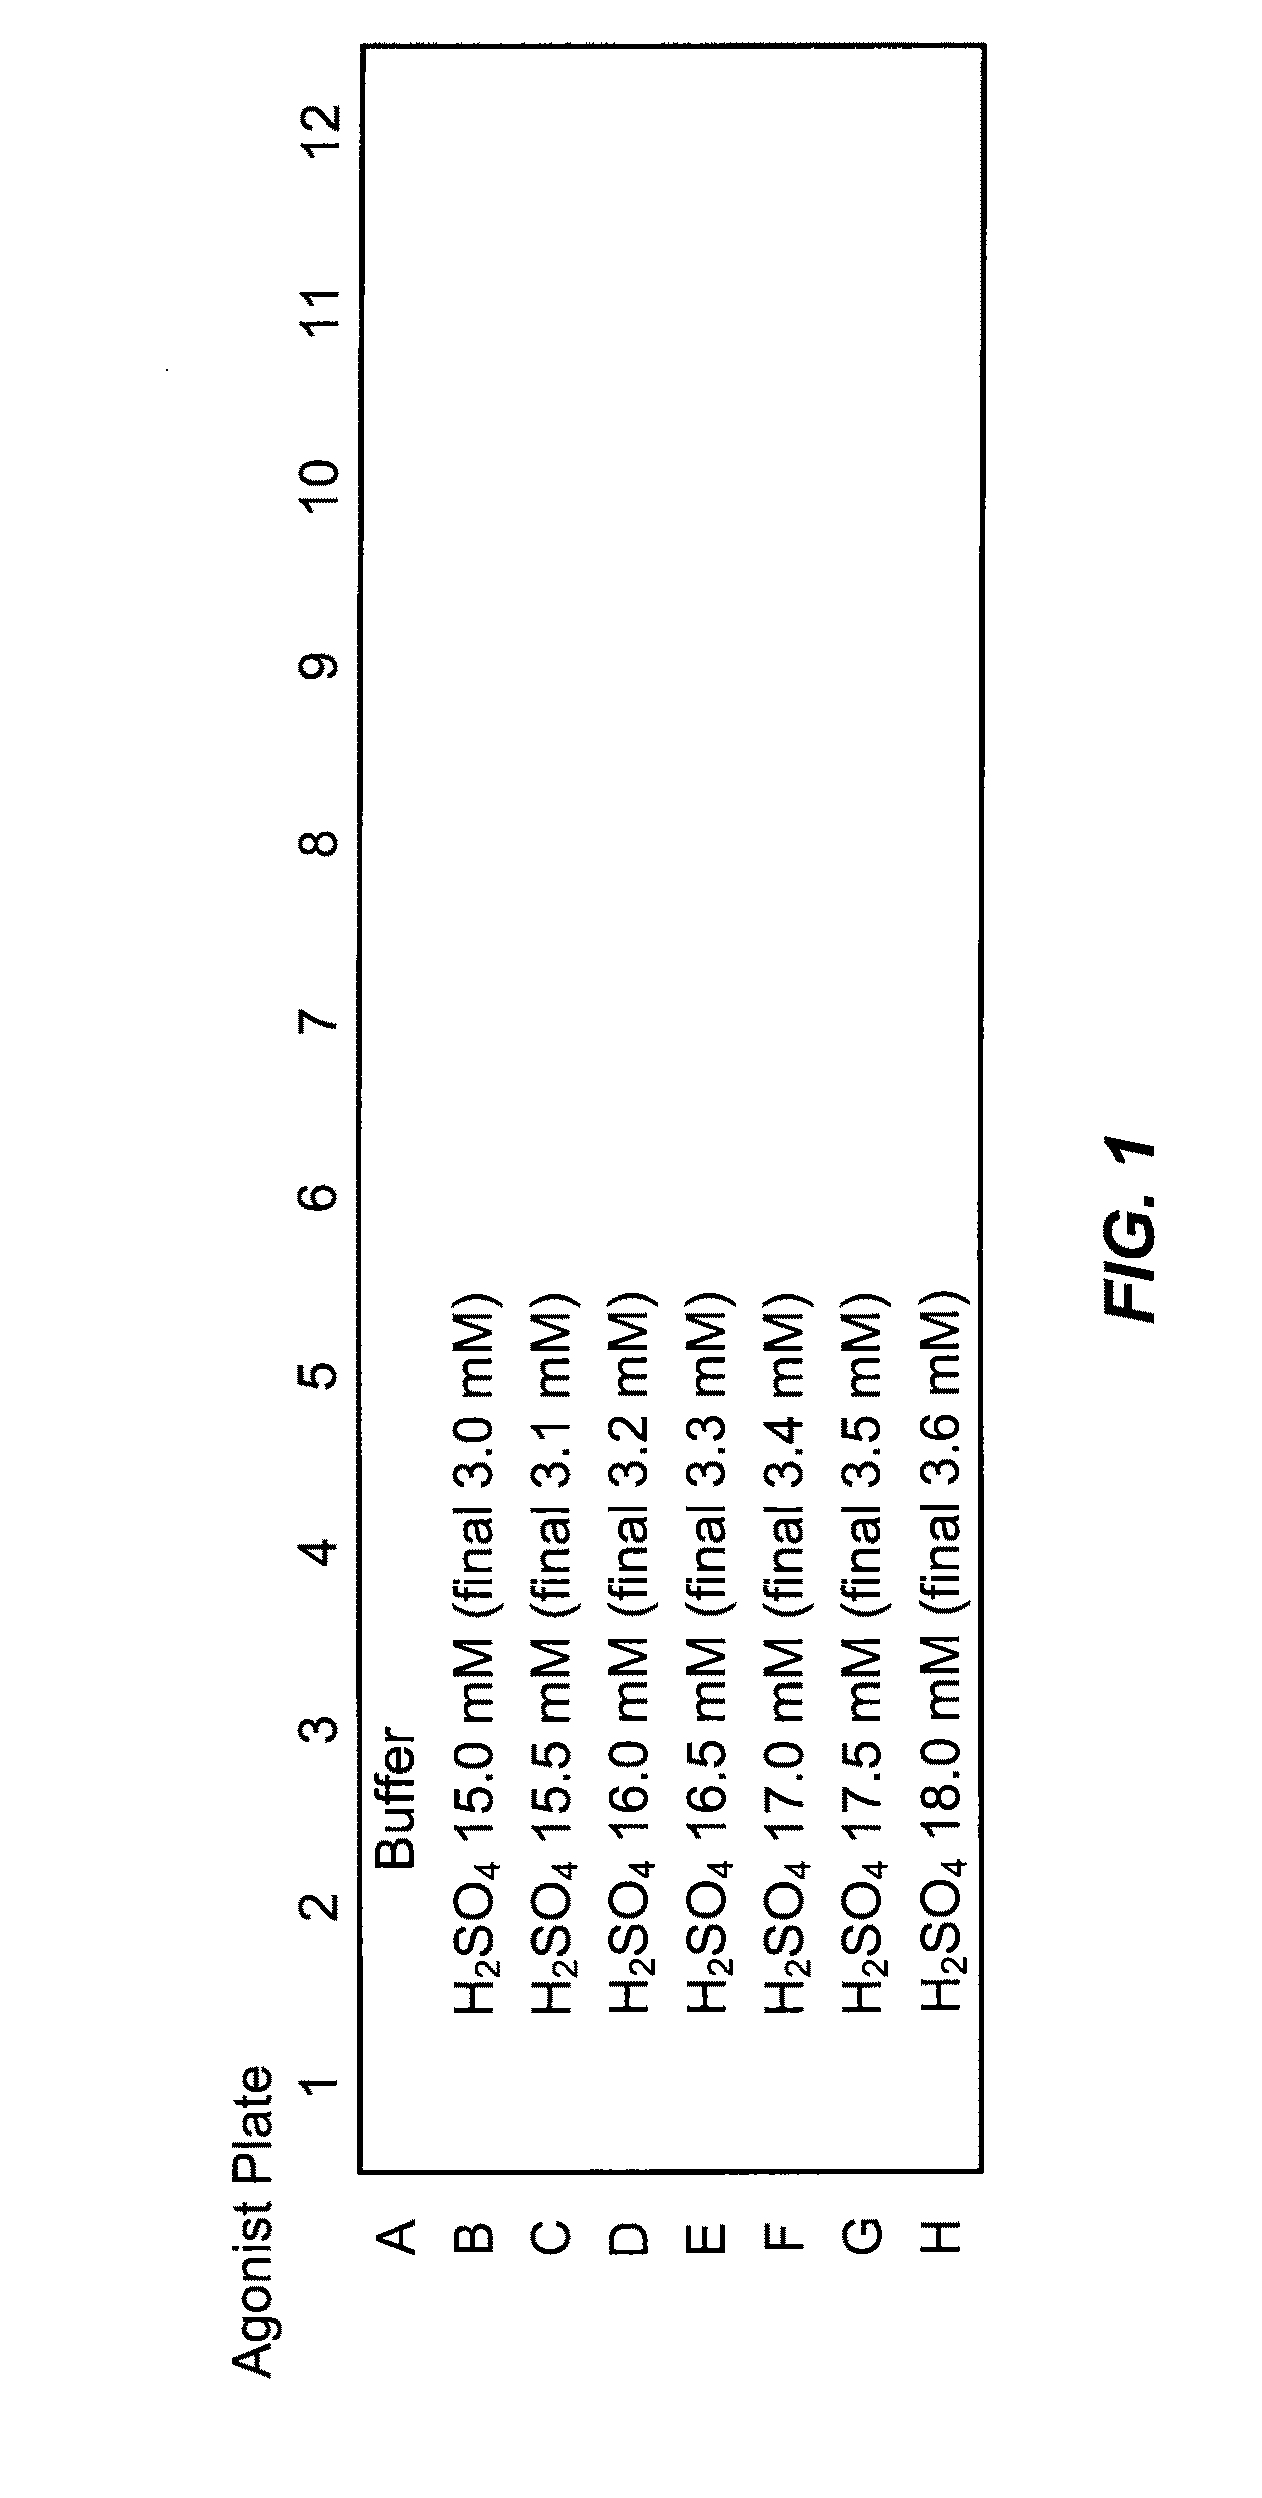 Trpv1 antagonists including dihydroxy substituent and uses thereof